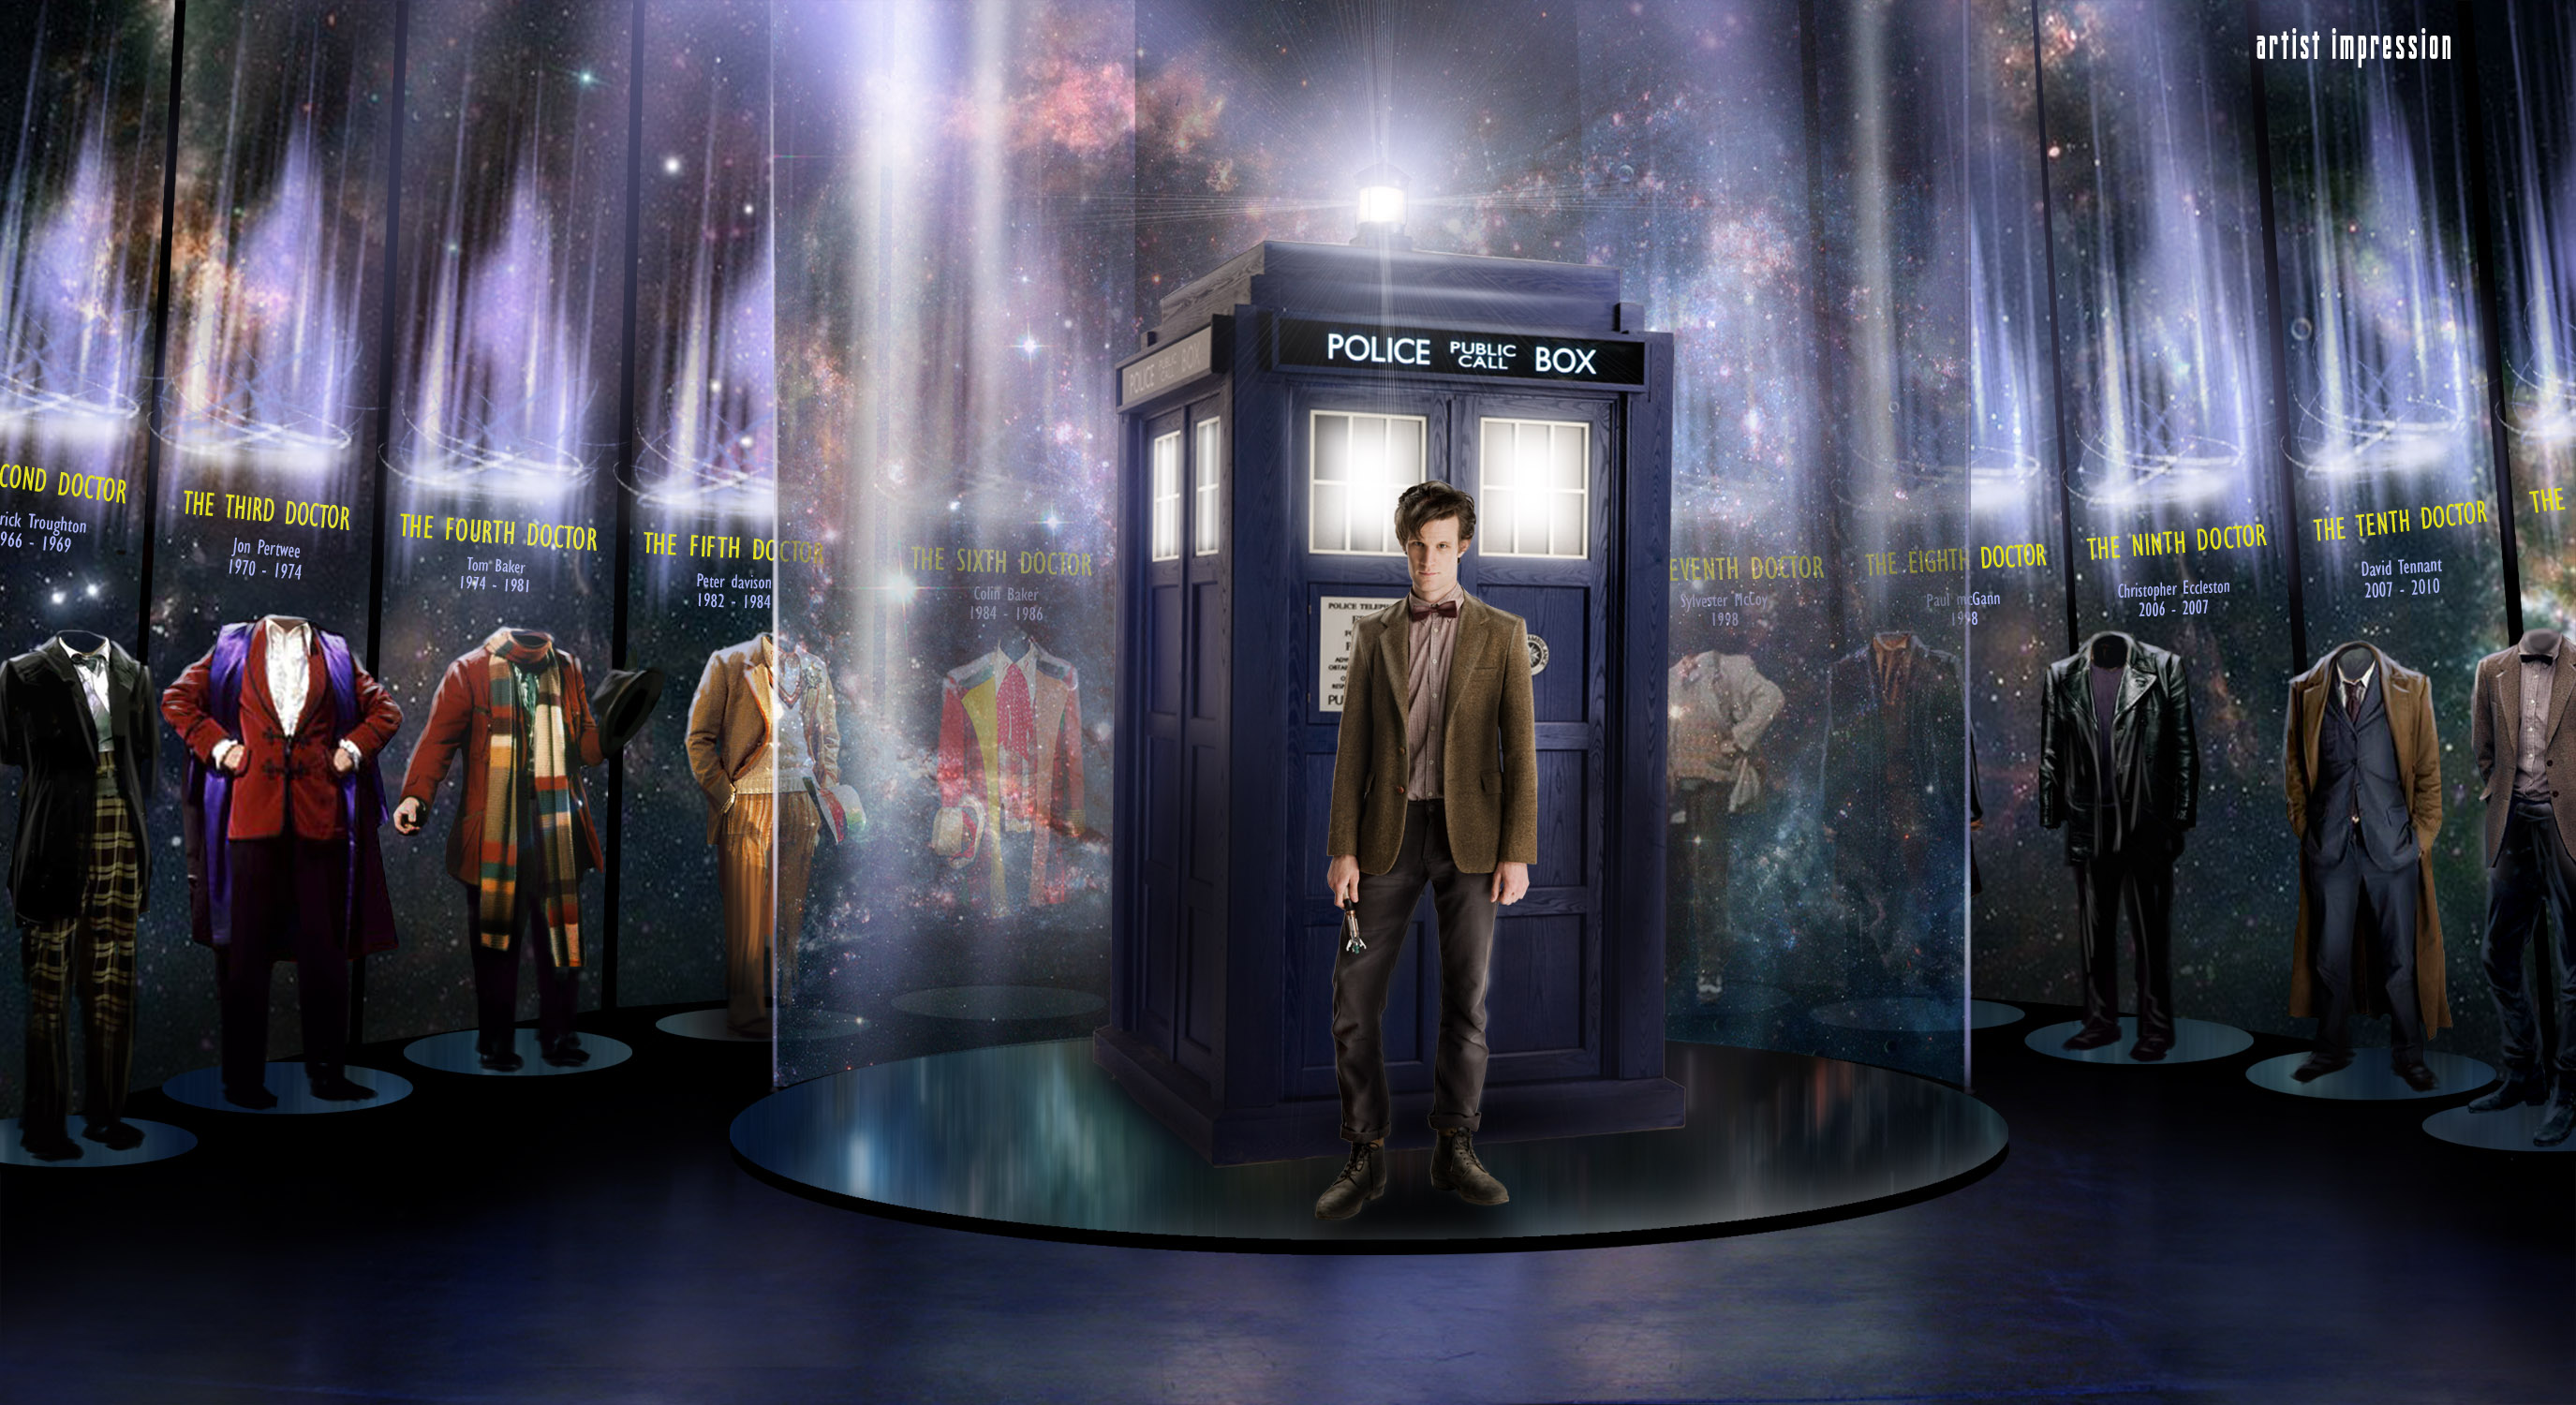 This was used as a promotional image for The Doctor Who Experience